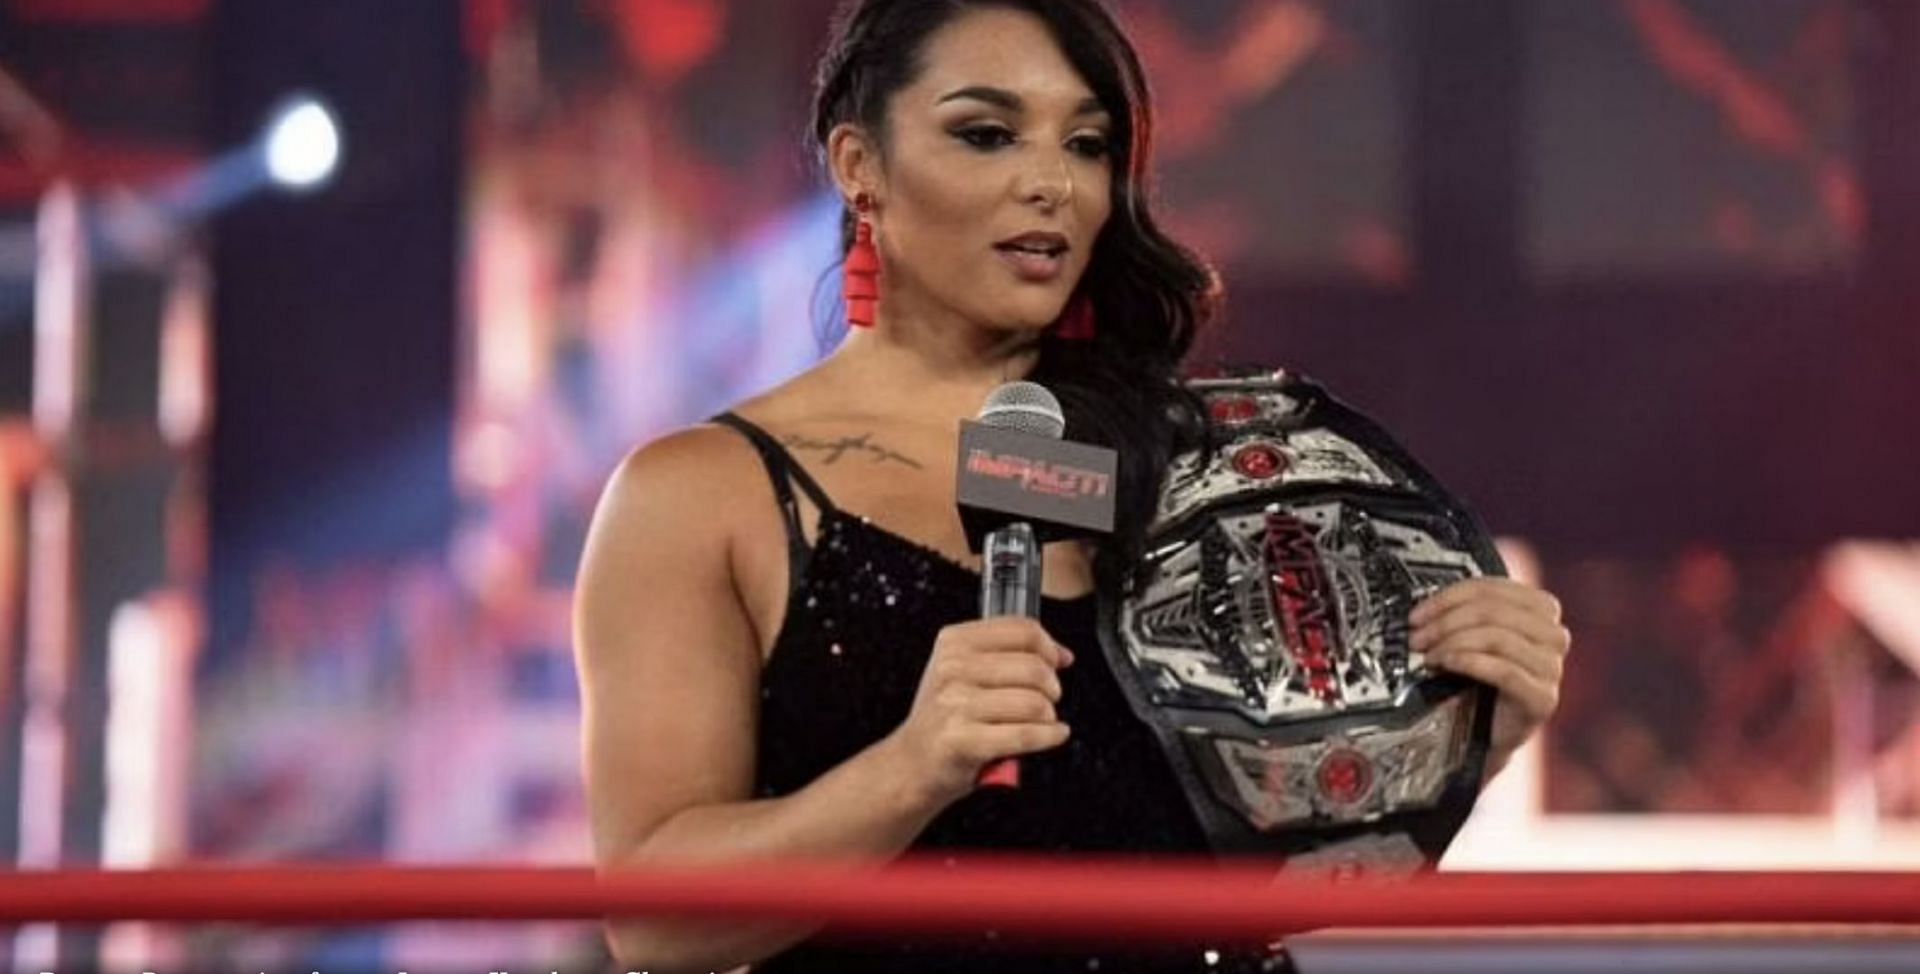 Deonna Purrazzo is a former IMPACT Knockouts Champion